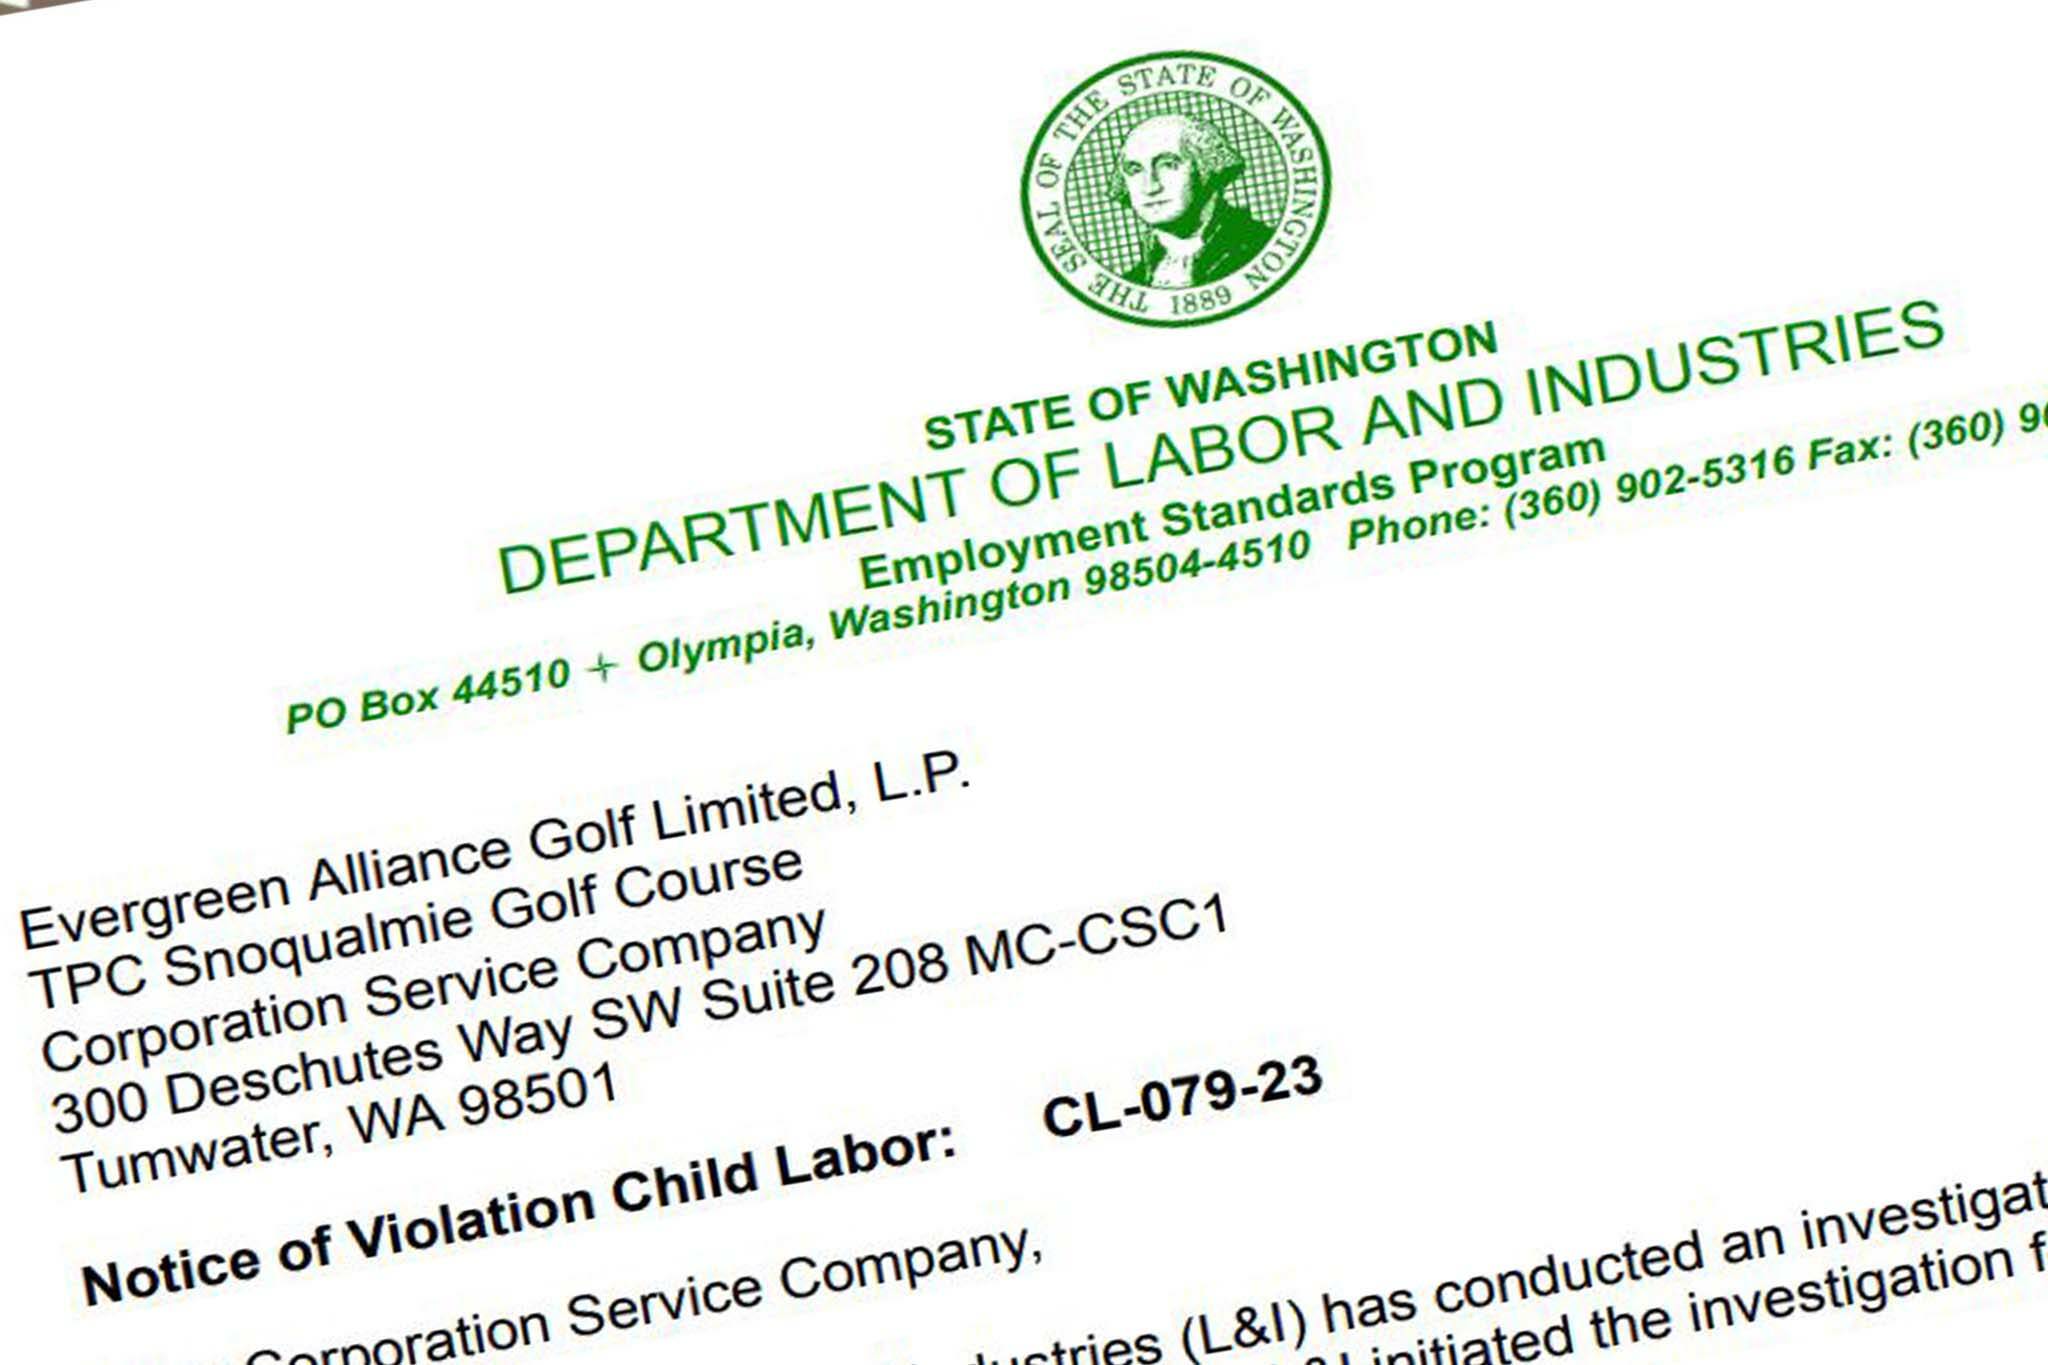 A screenshot of the citation issued by the Department of Labor & Industries.